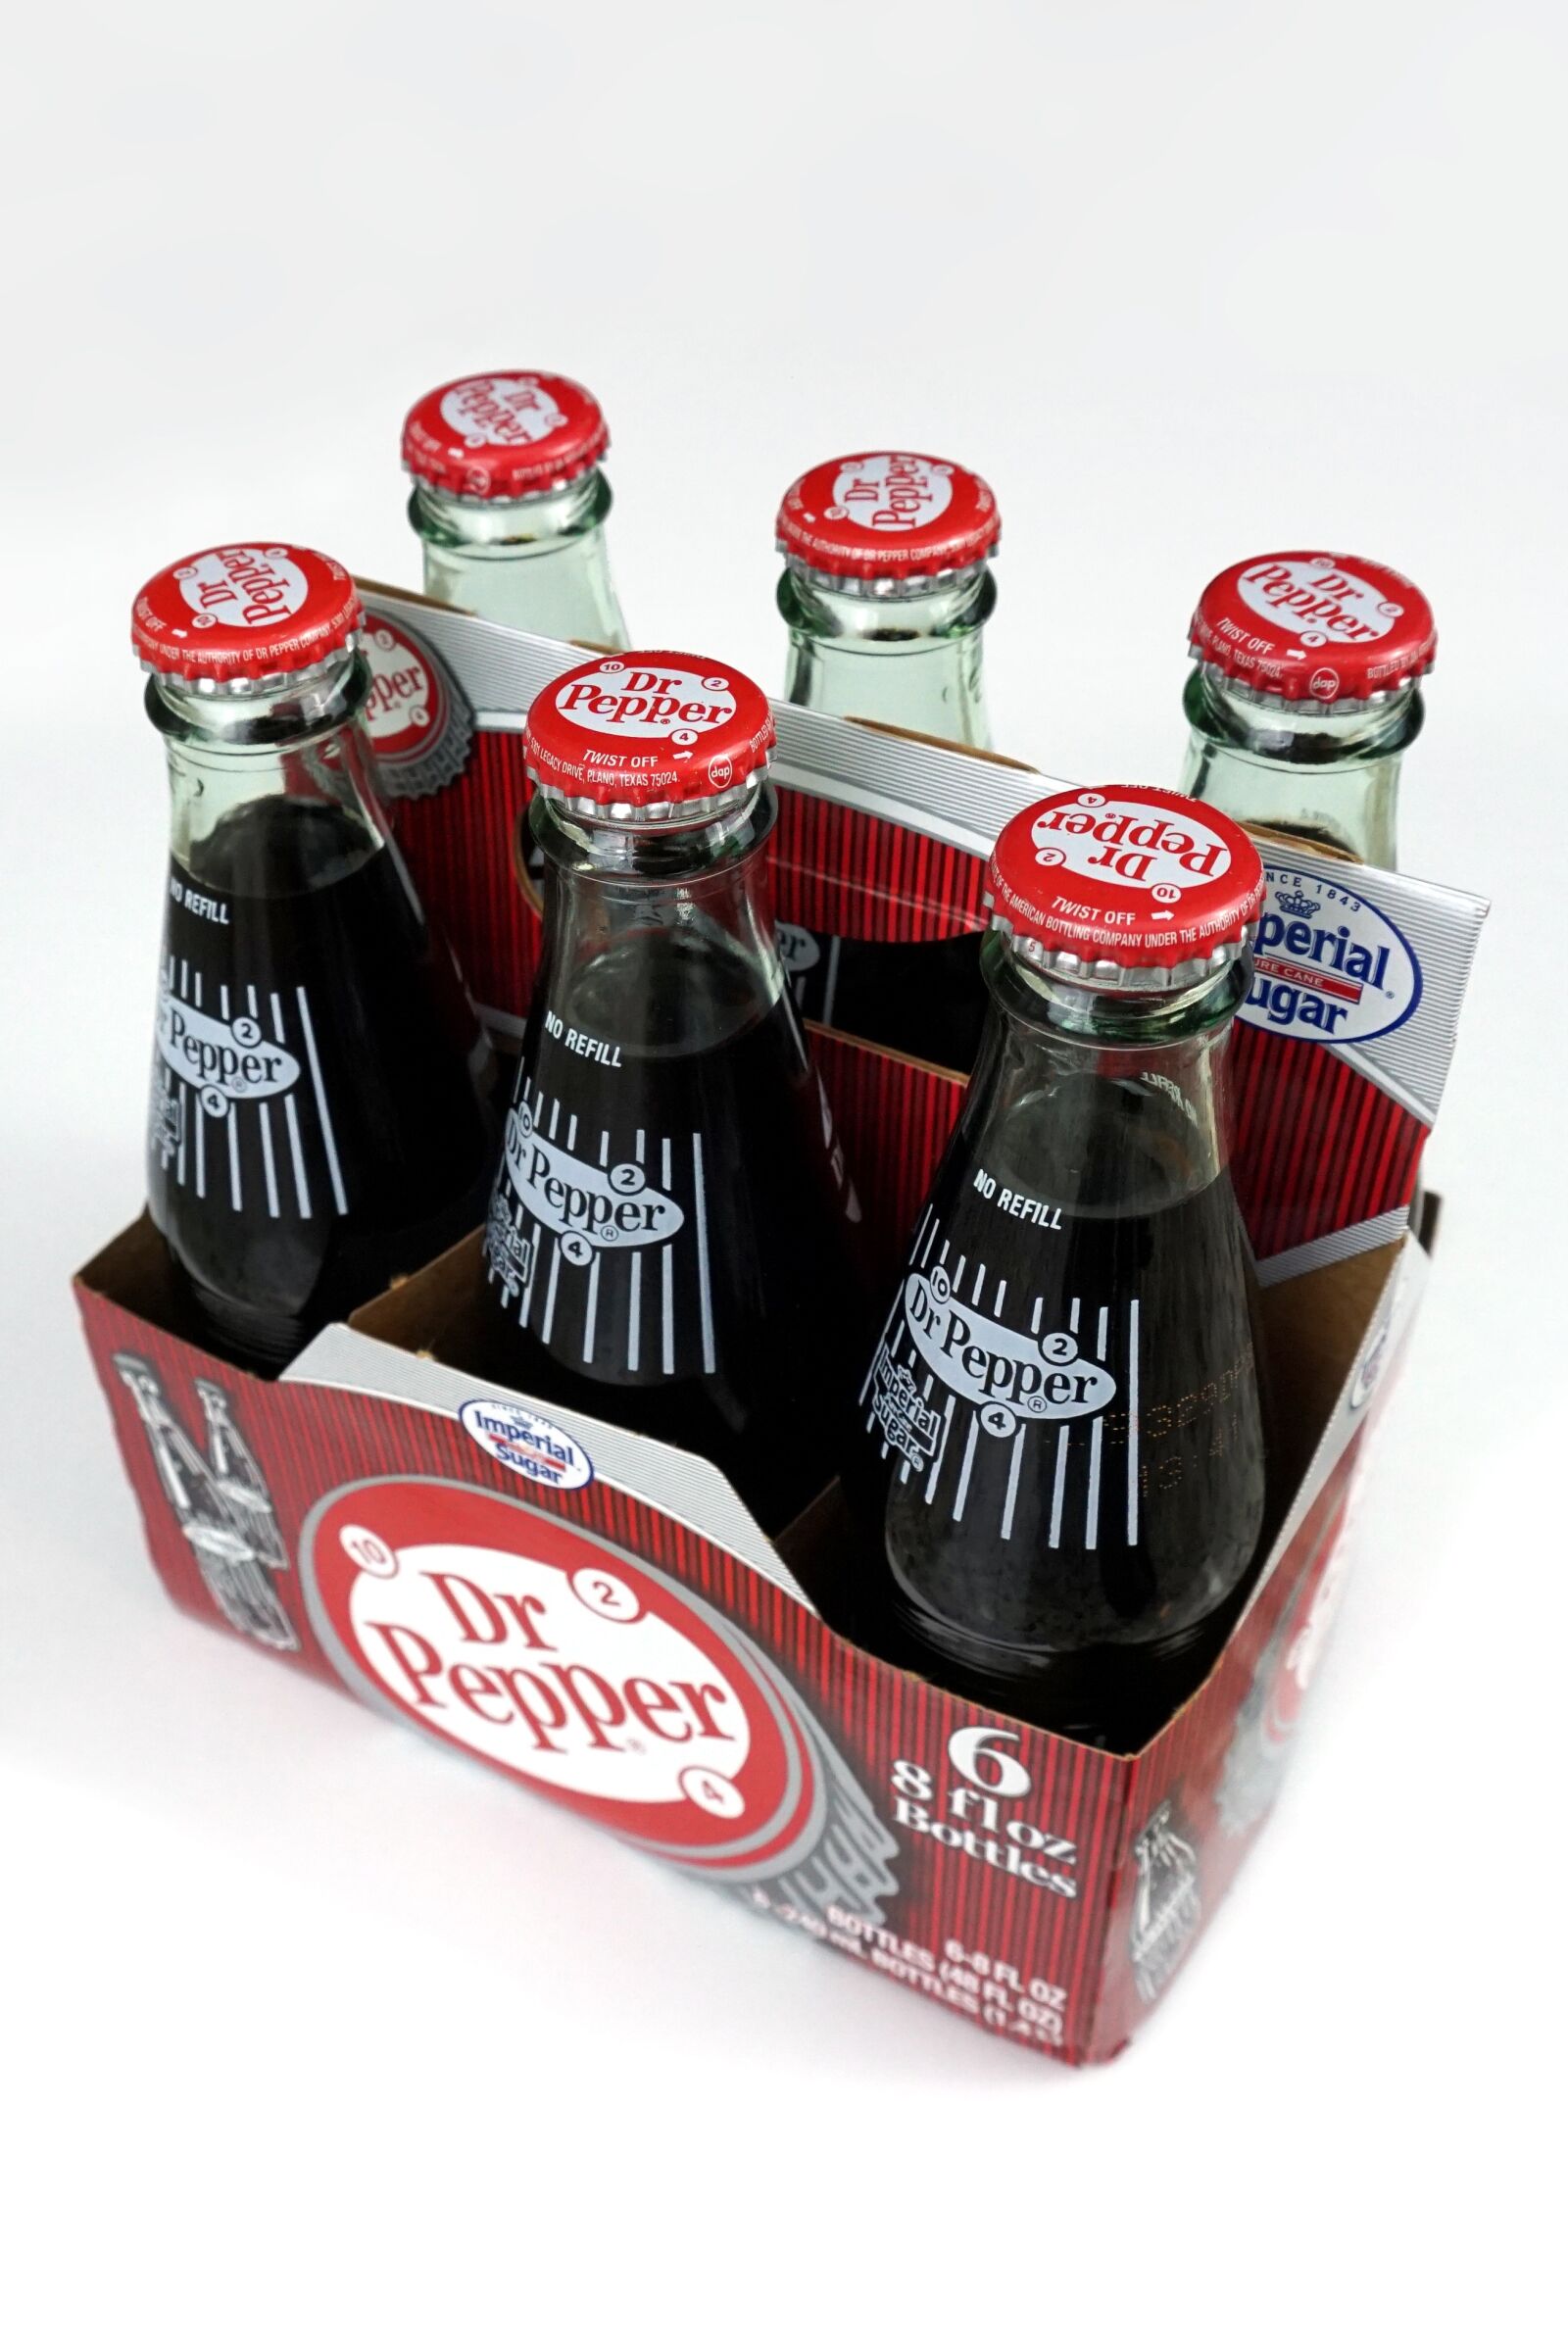 Sony a6000 sample photo. Dr, pepper, doctor pepper photography